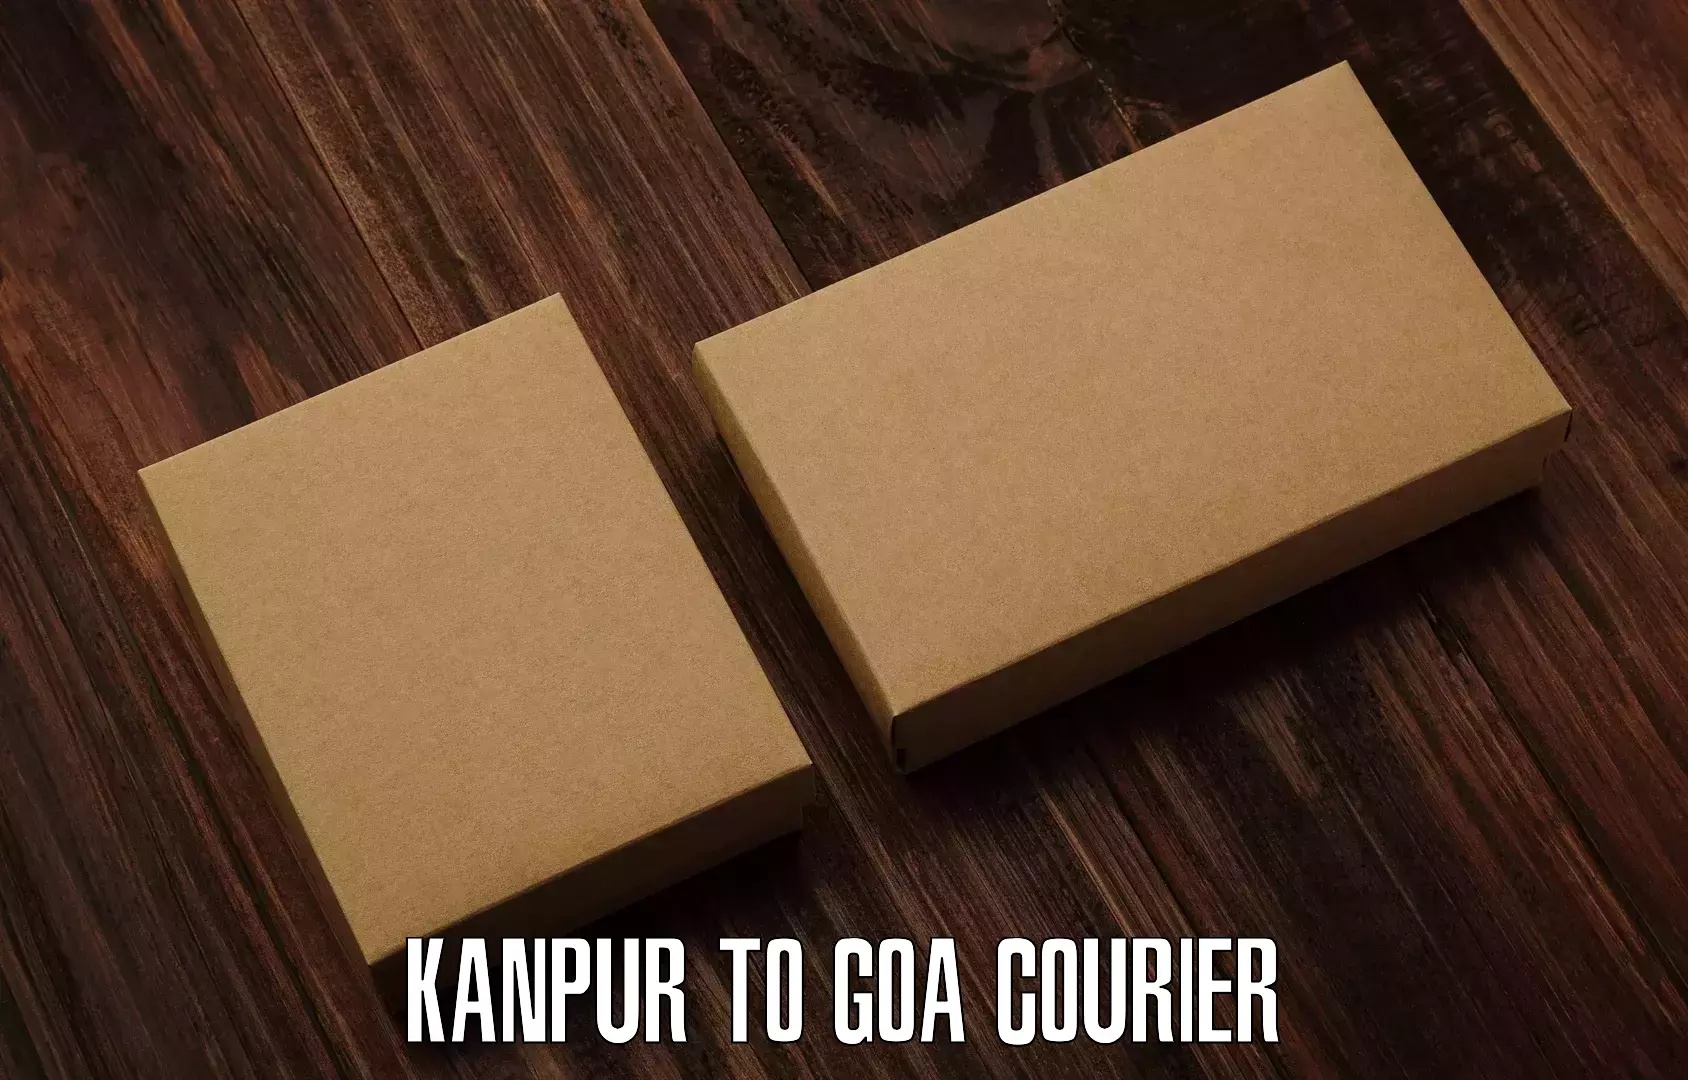 High-speed parcel service Kanpur to Goa